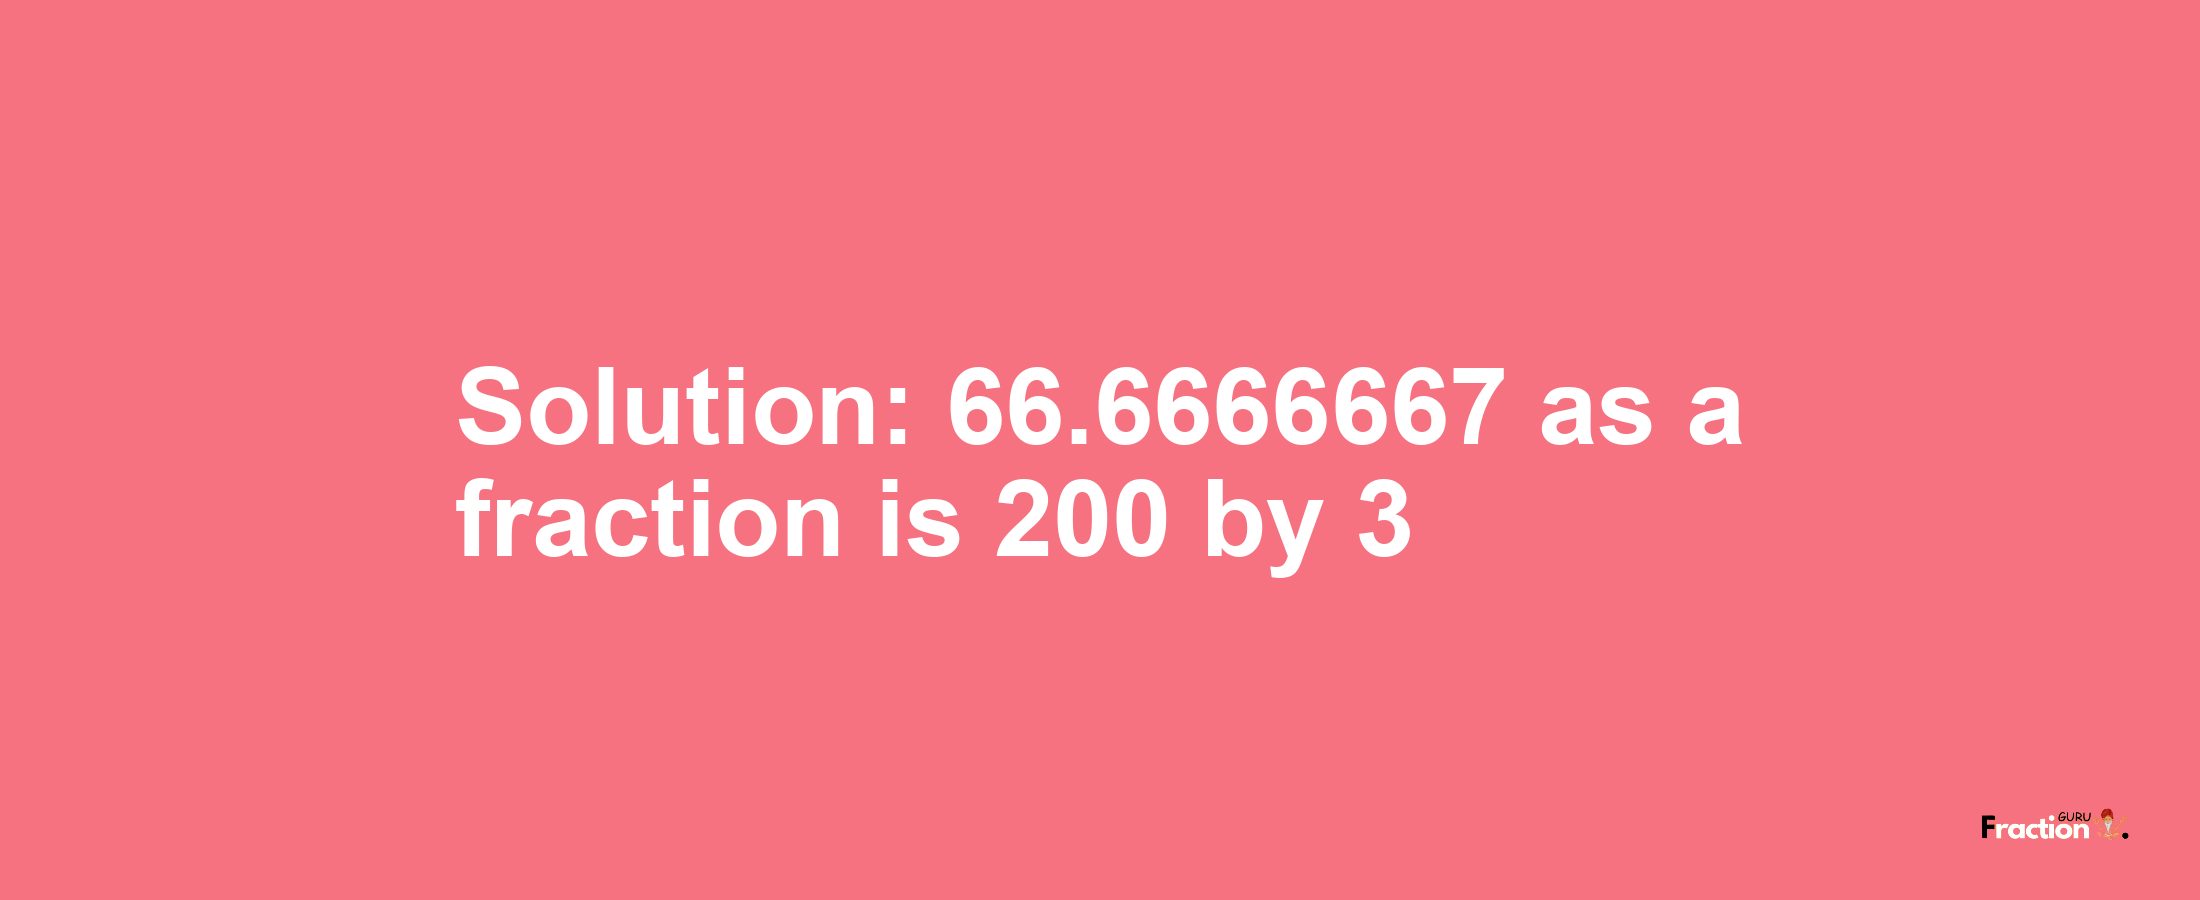 Solution:66.6666667 as a fraction is 200/3